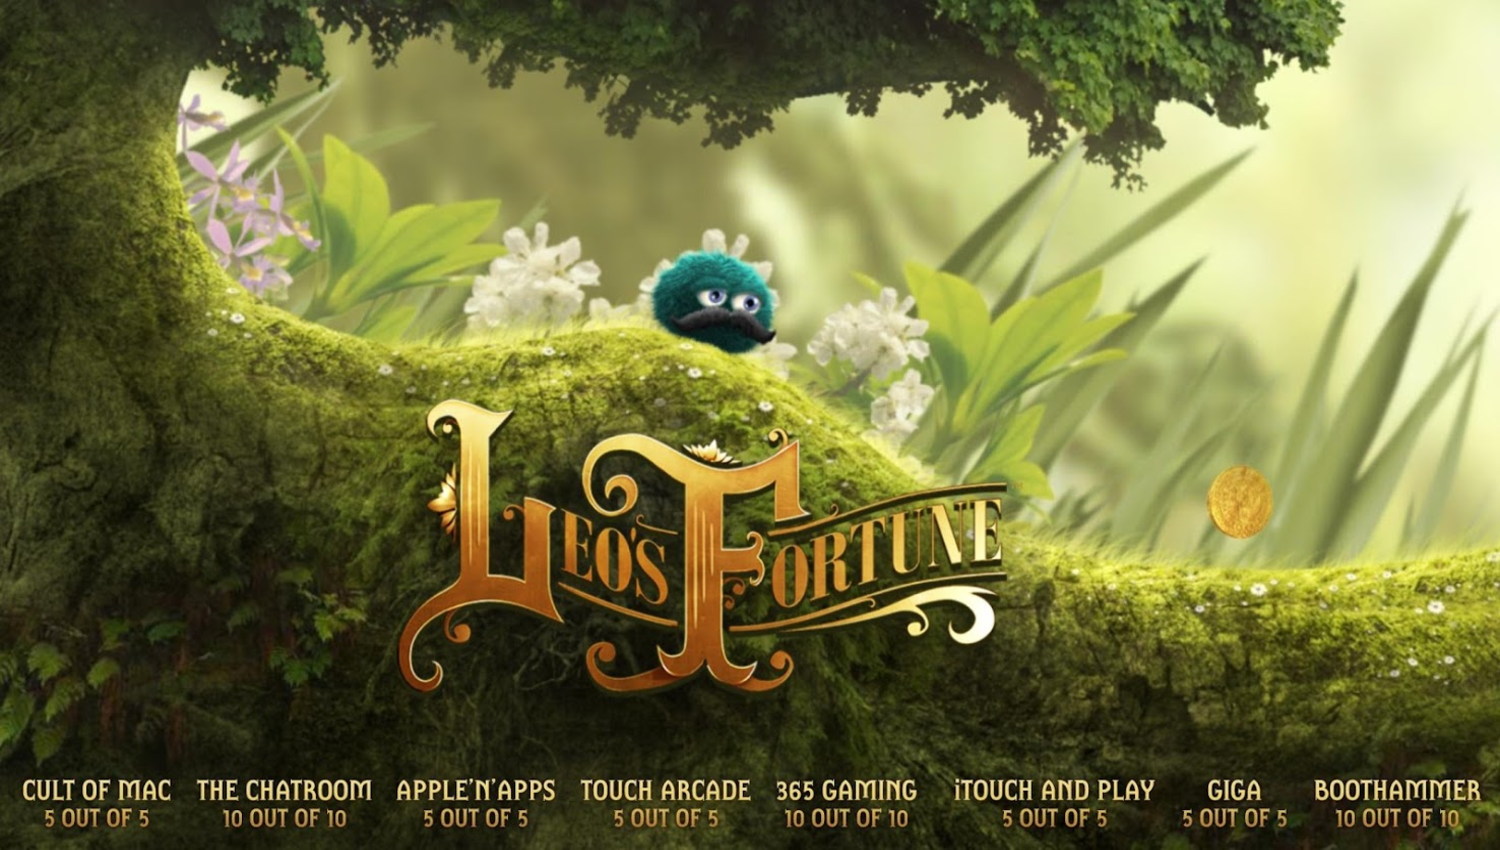 Leo’s Fortune v1.0.7 (Paid) Apk